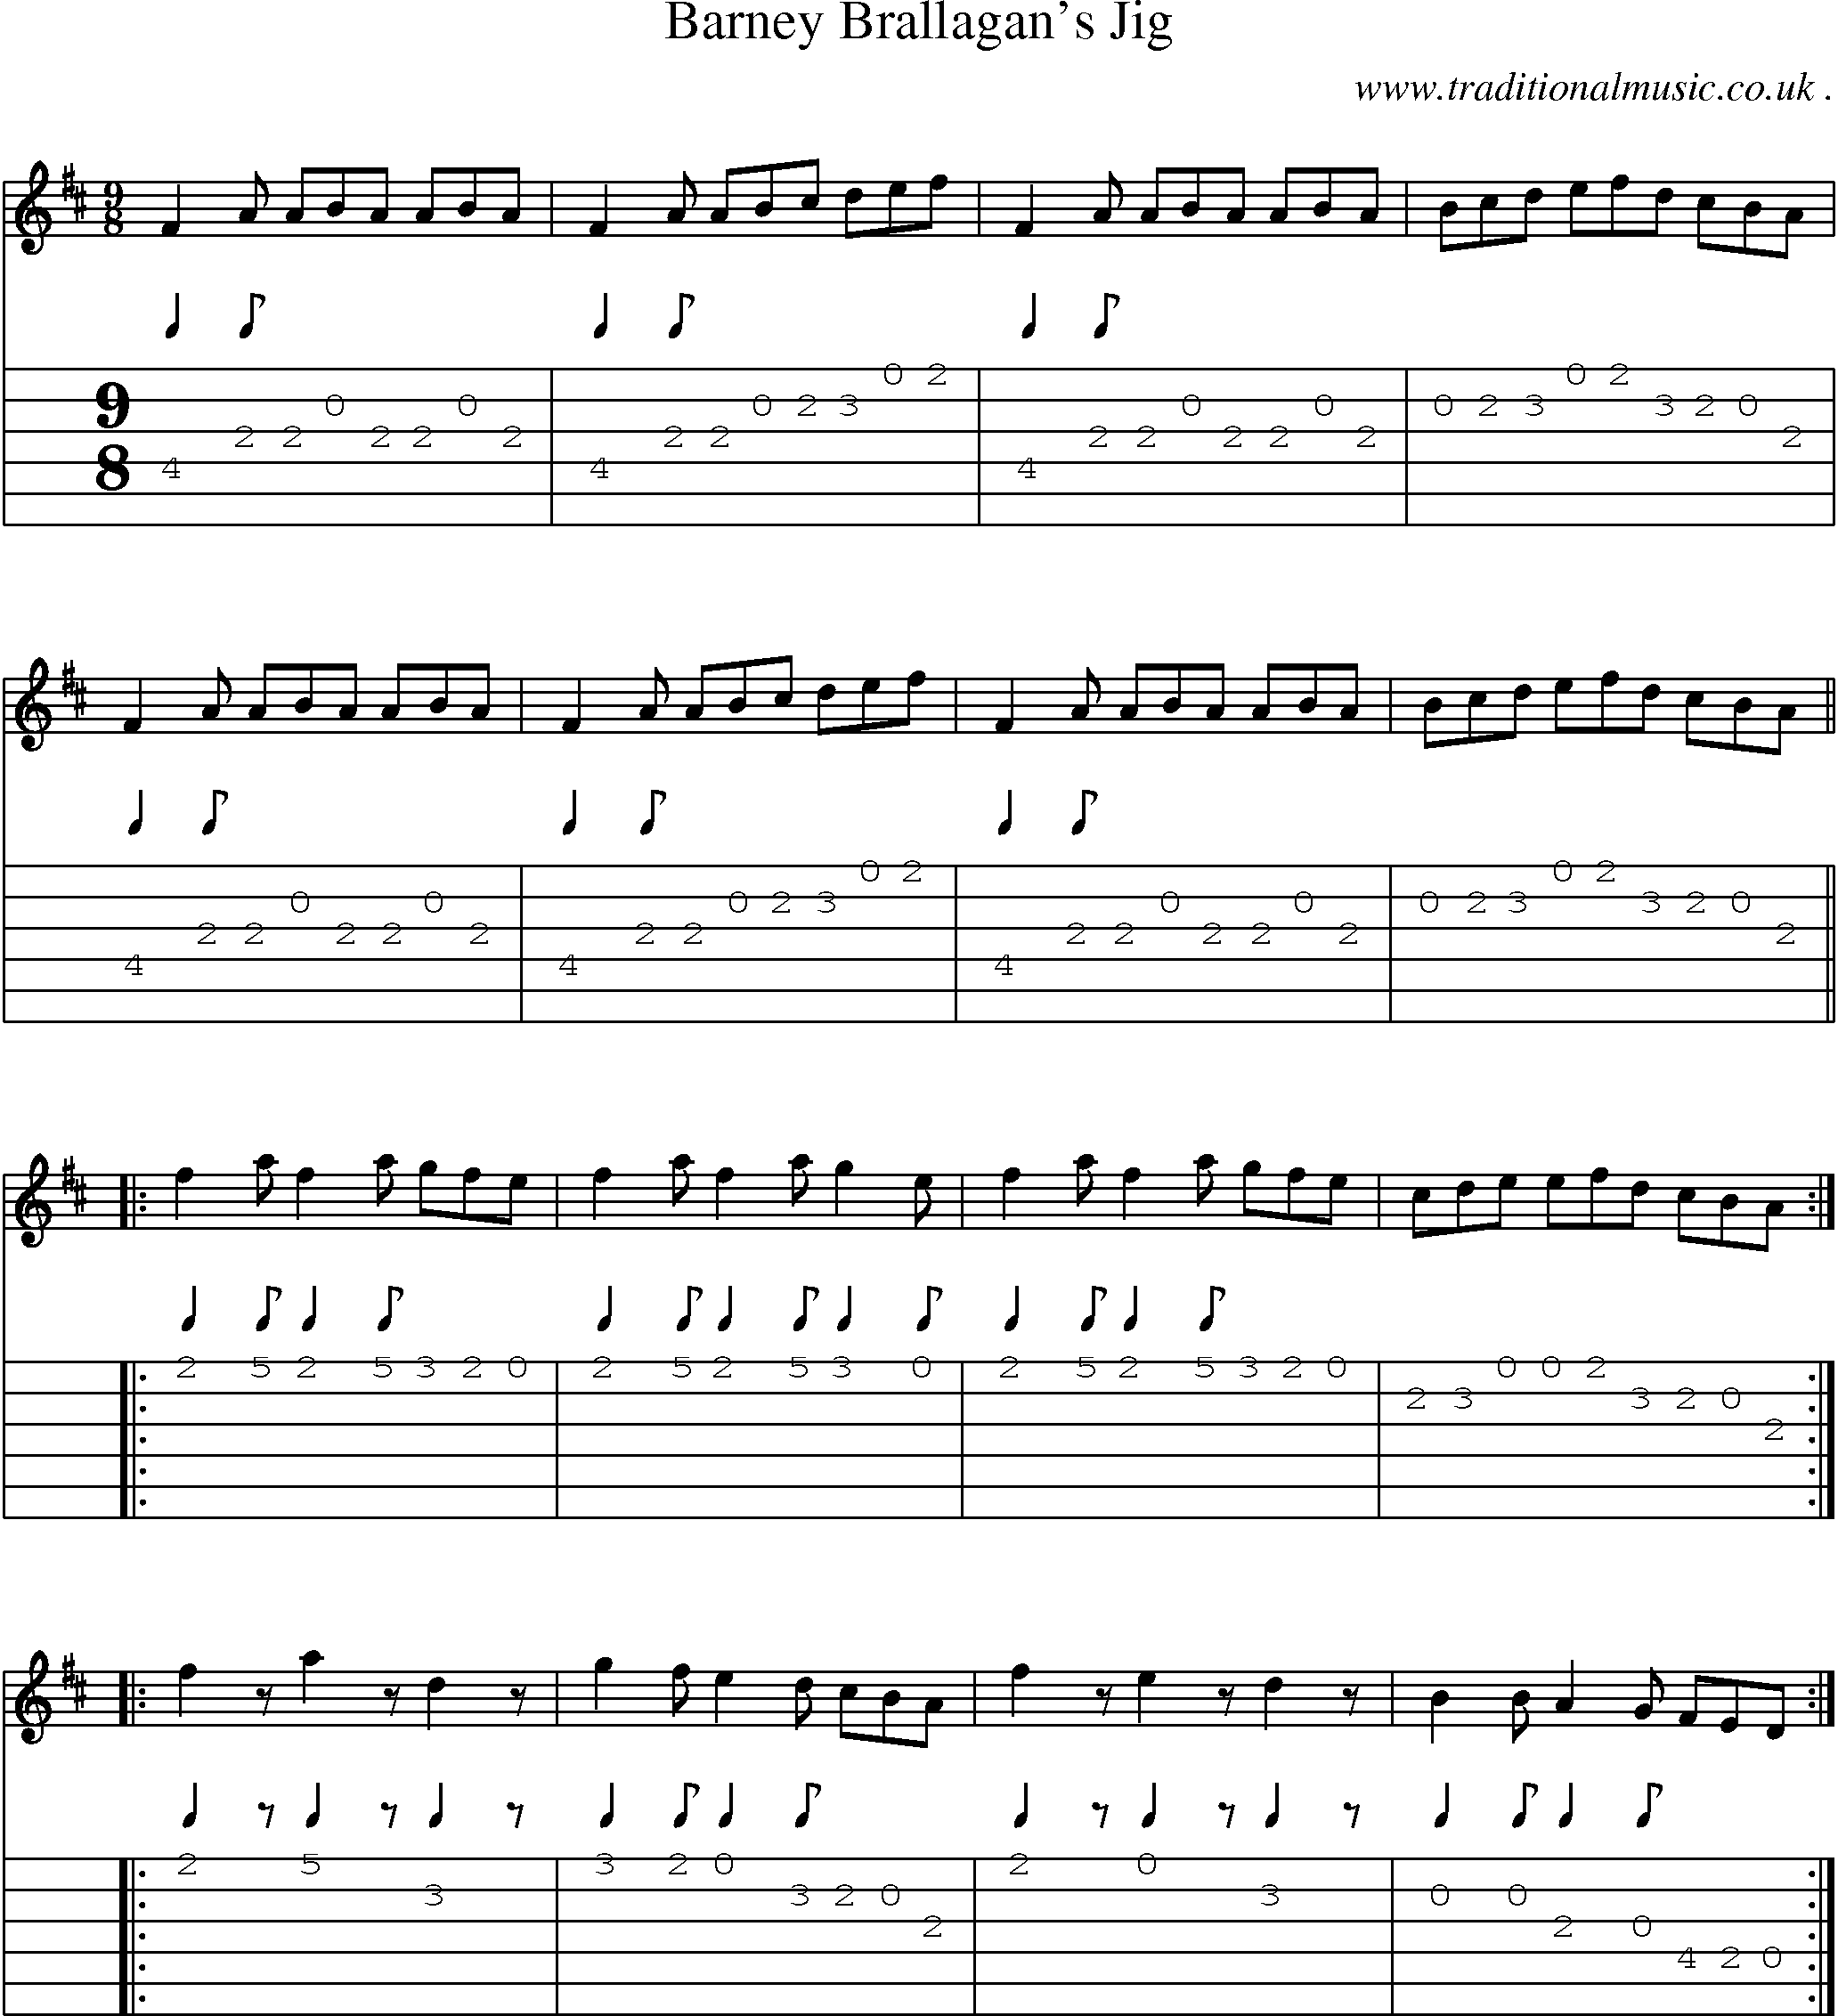 Sheet-Music and Guitar Tabs for Barney Brallagans Jig